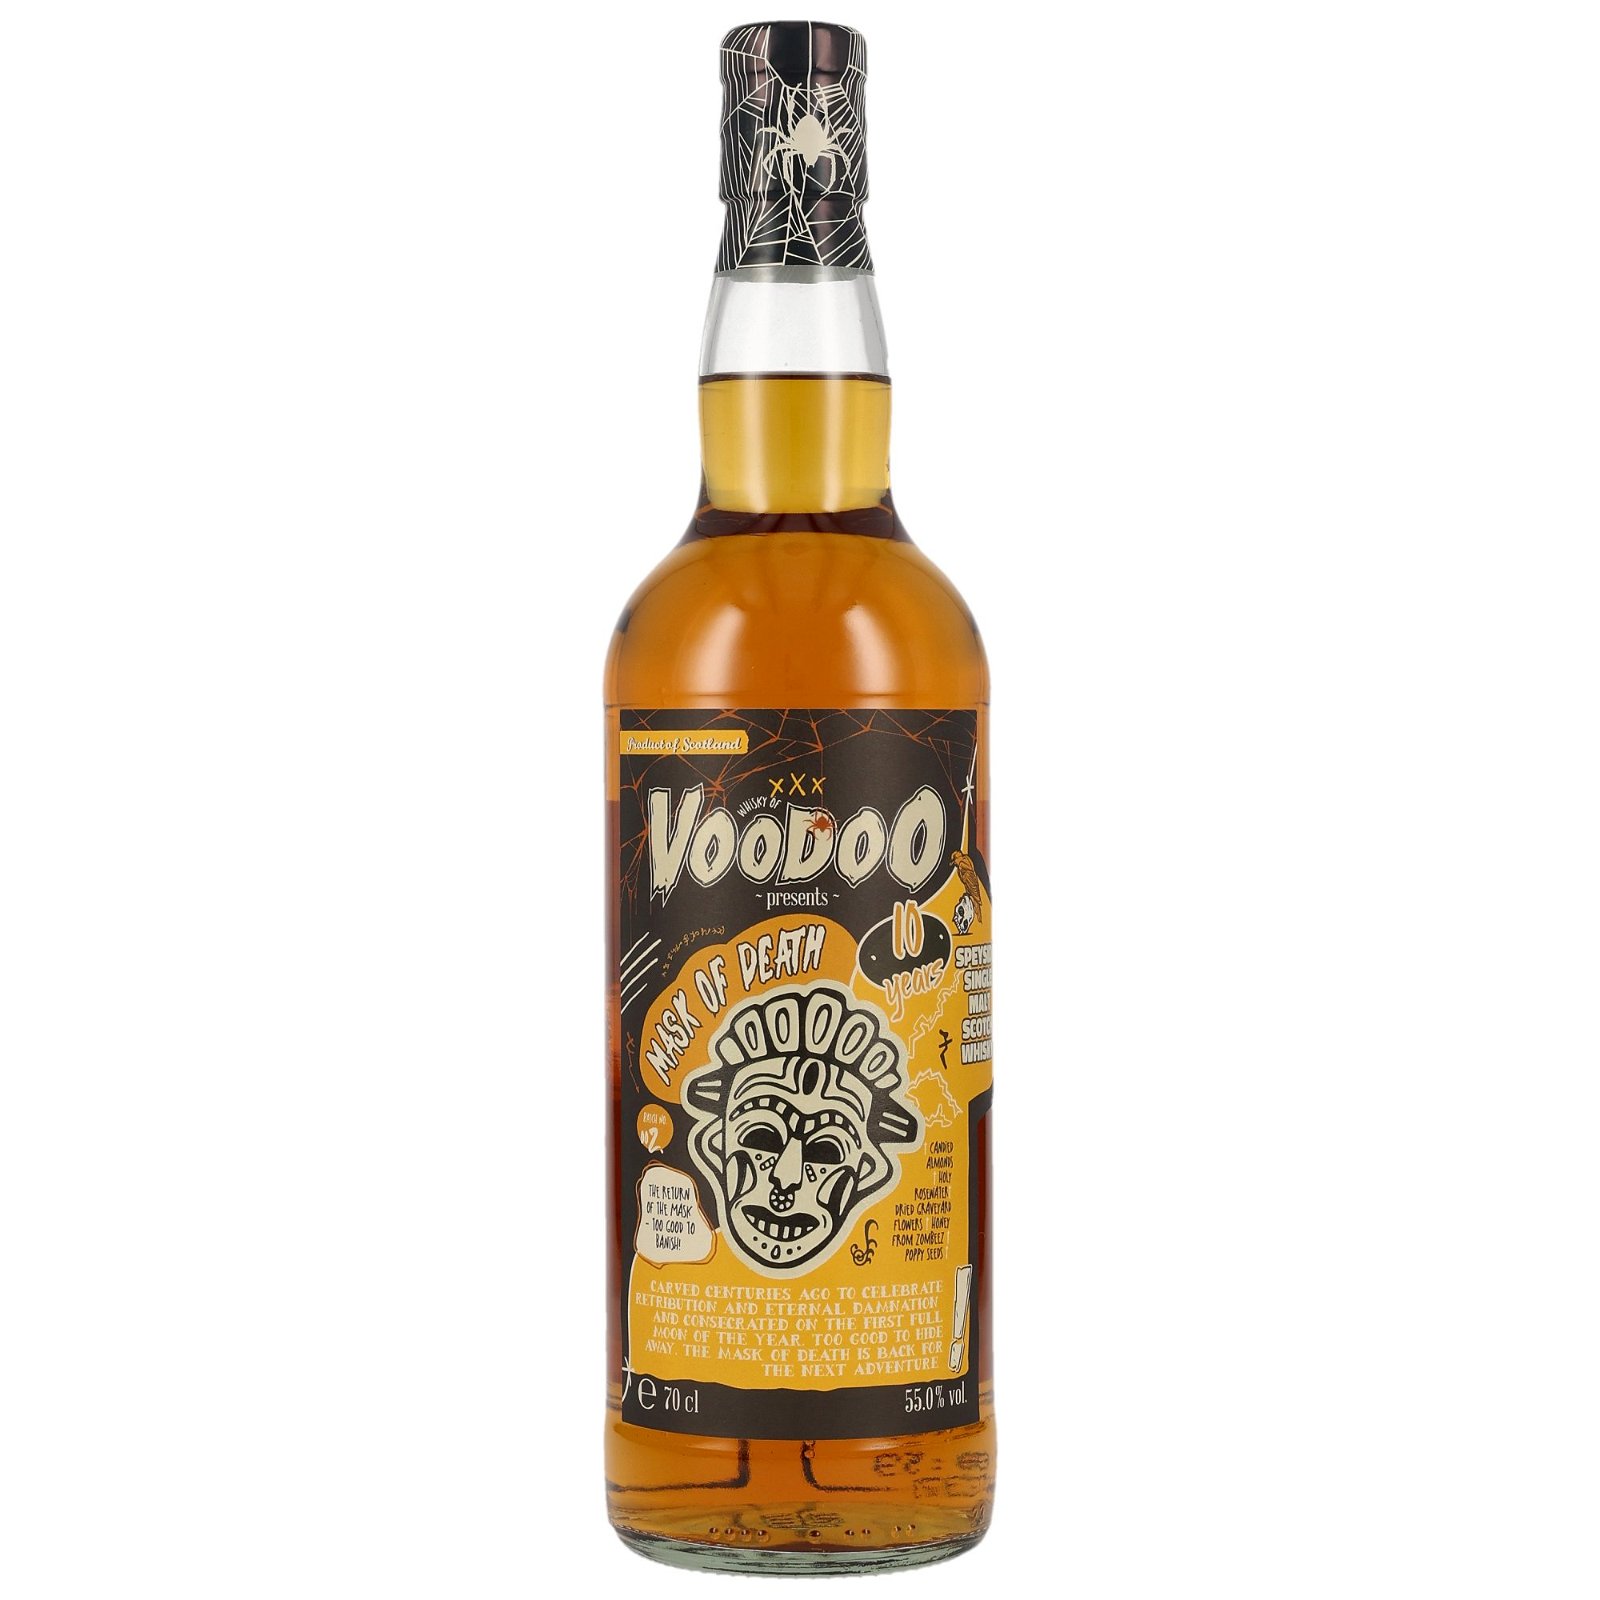 Whisky of Voodoo 10 Jahre Mask of Death Batch No. 002 (Brave New Spirits)